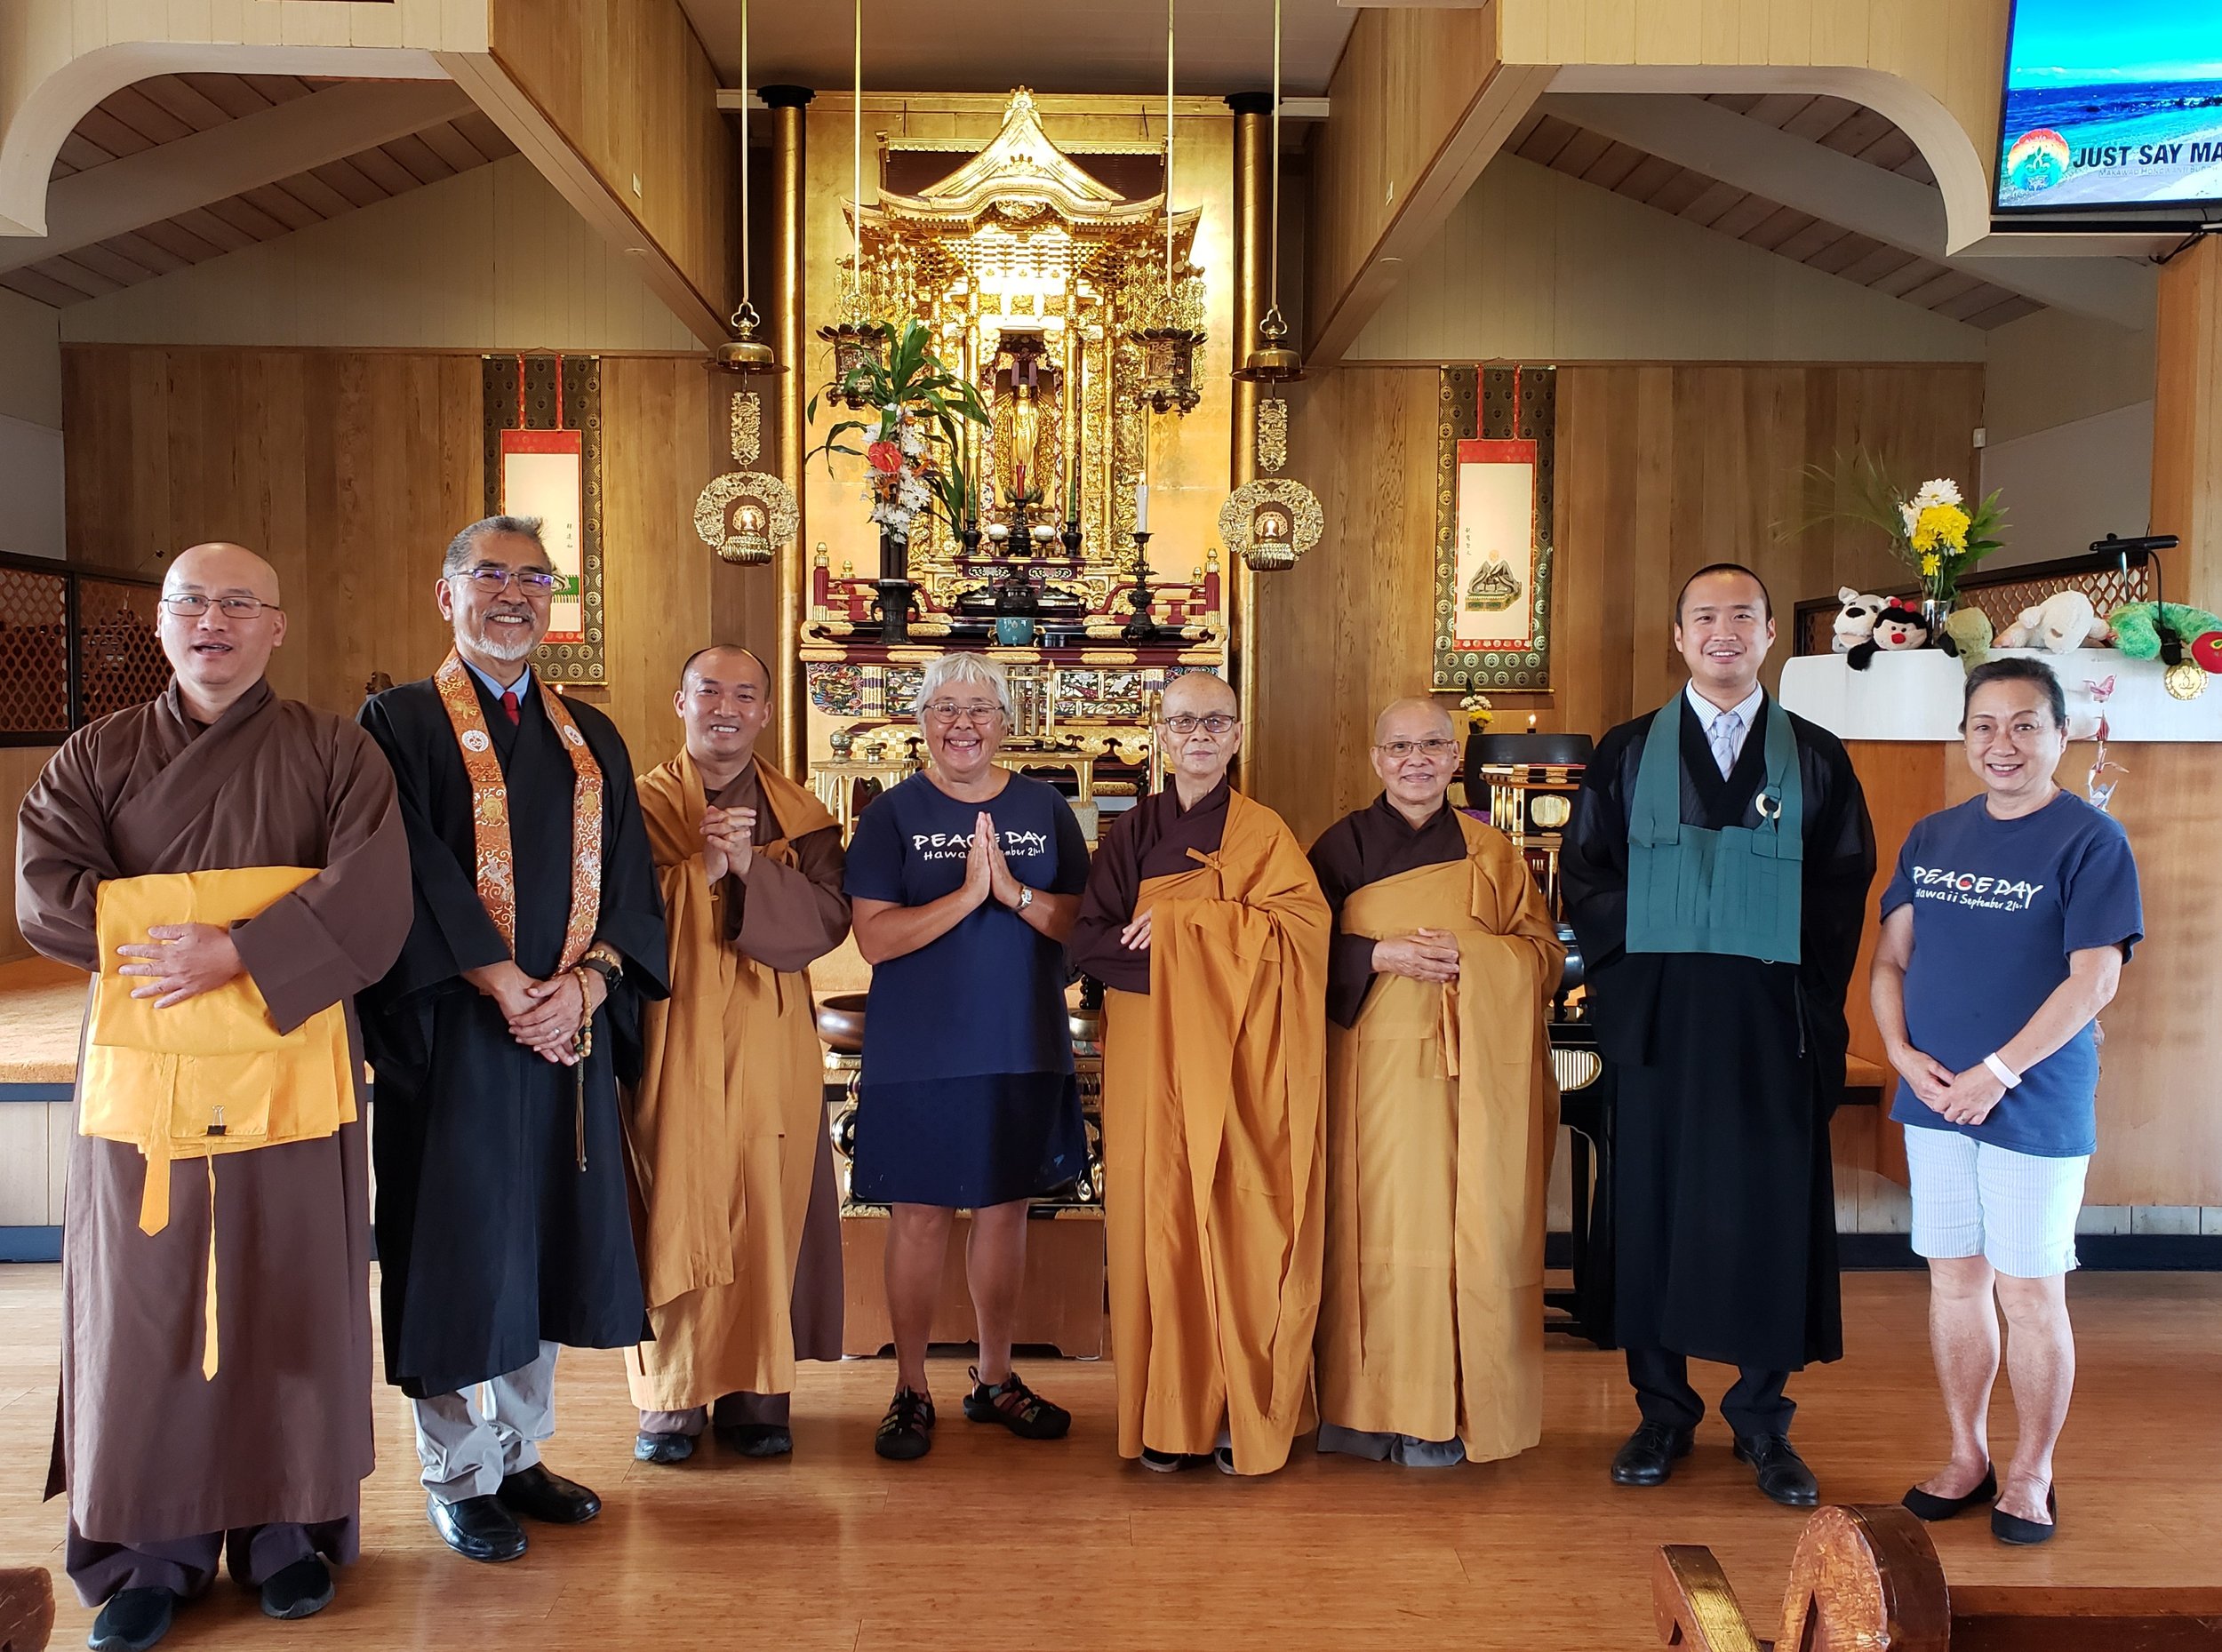   Jean and Mimy with Rev. Kiyohara, Vietnamese Buddhist Brothers and Sisters, and Rev. Hirasawa  